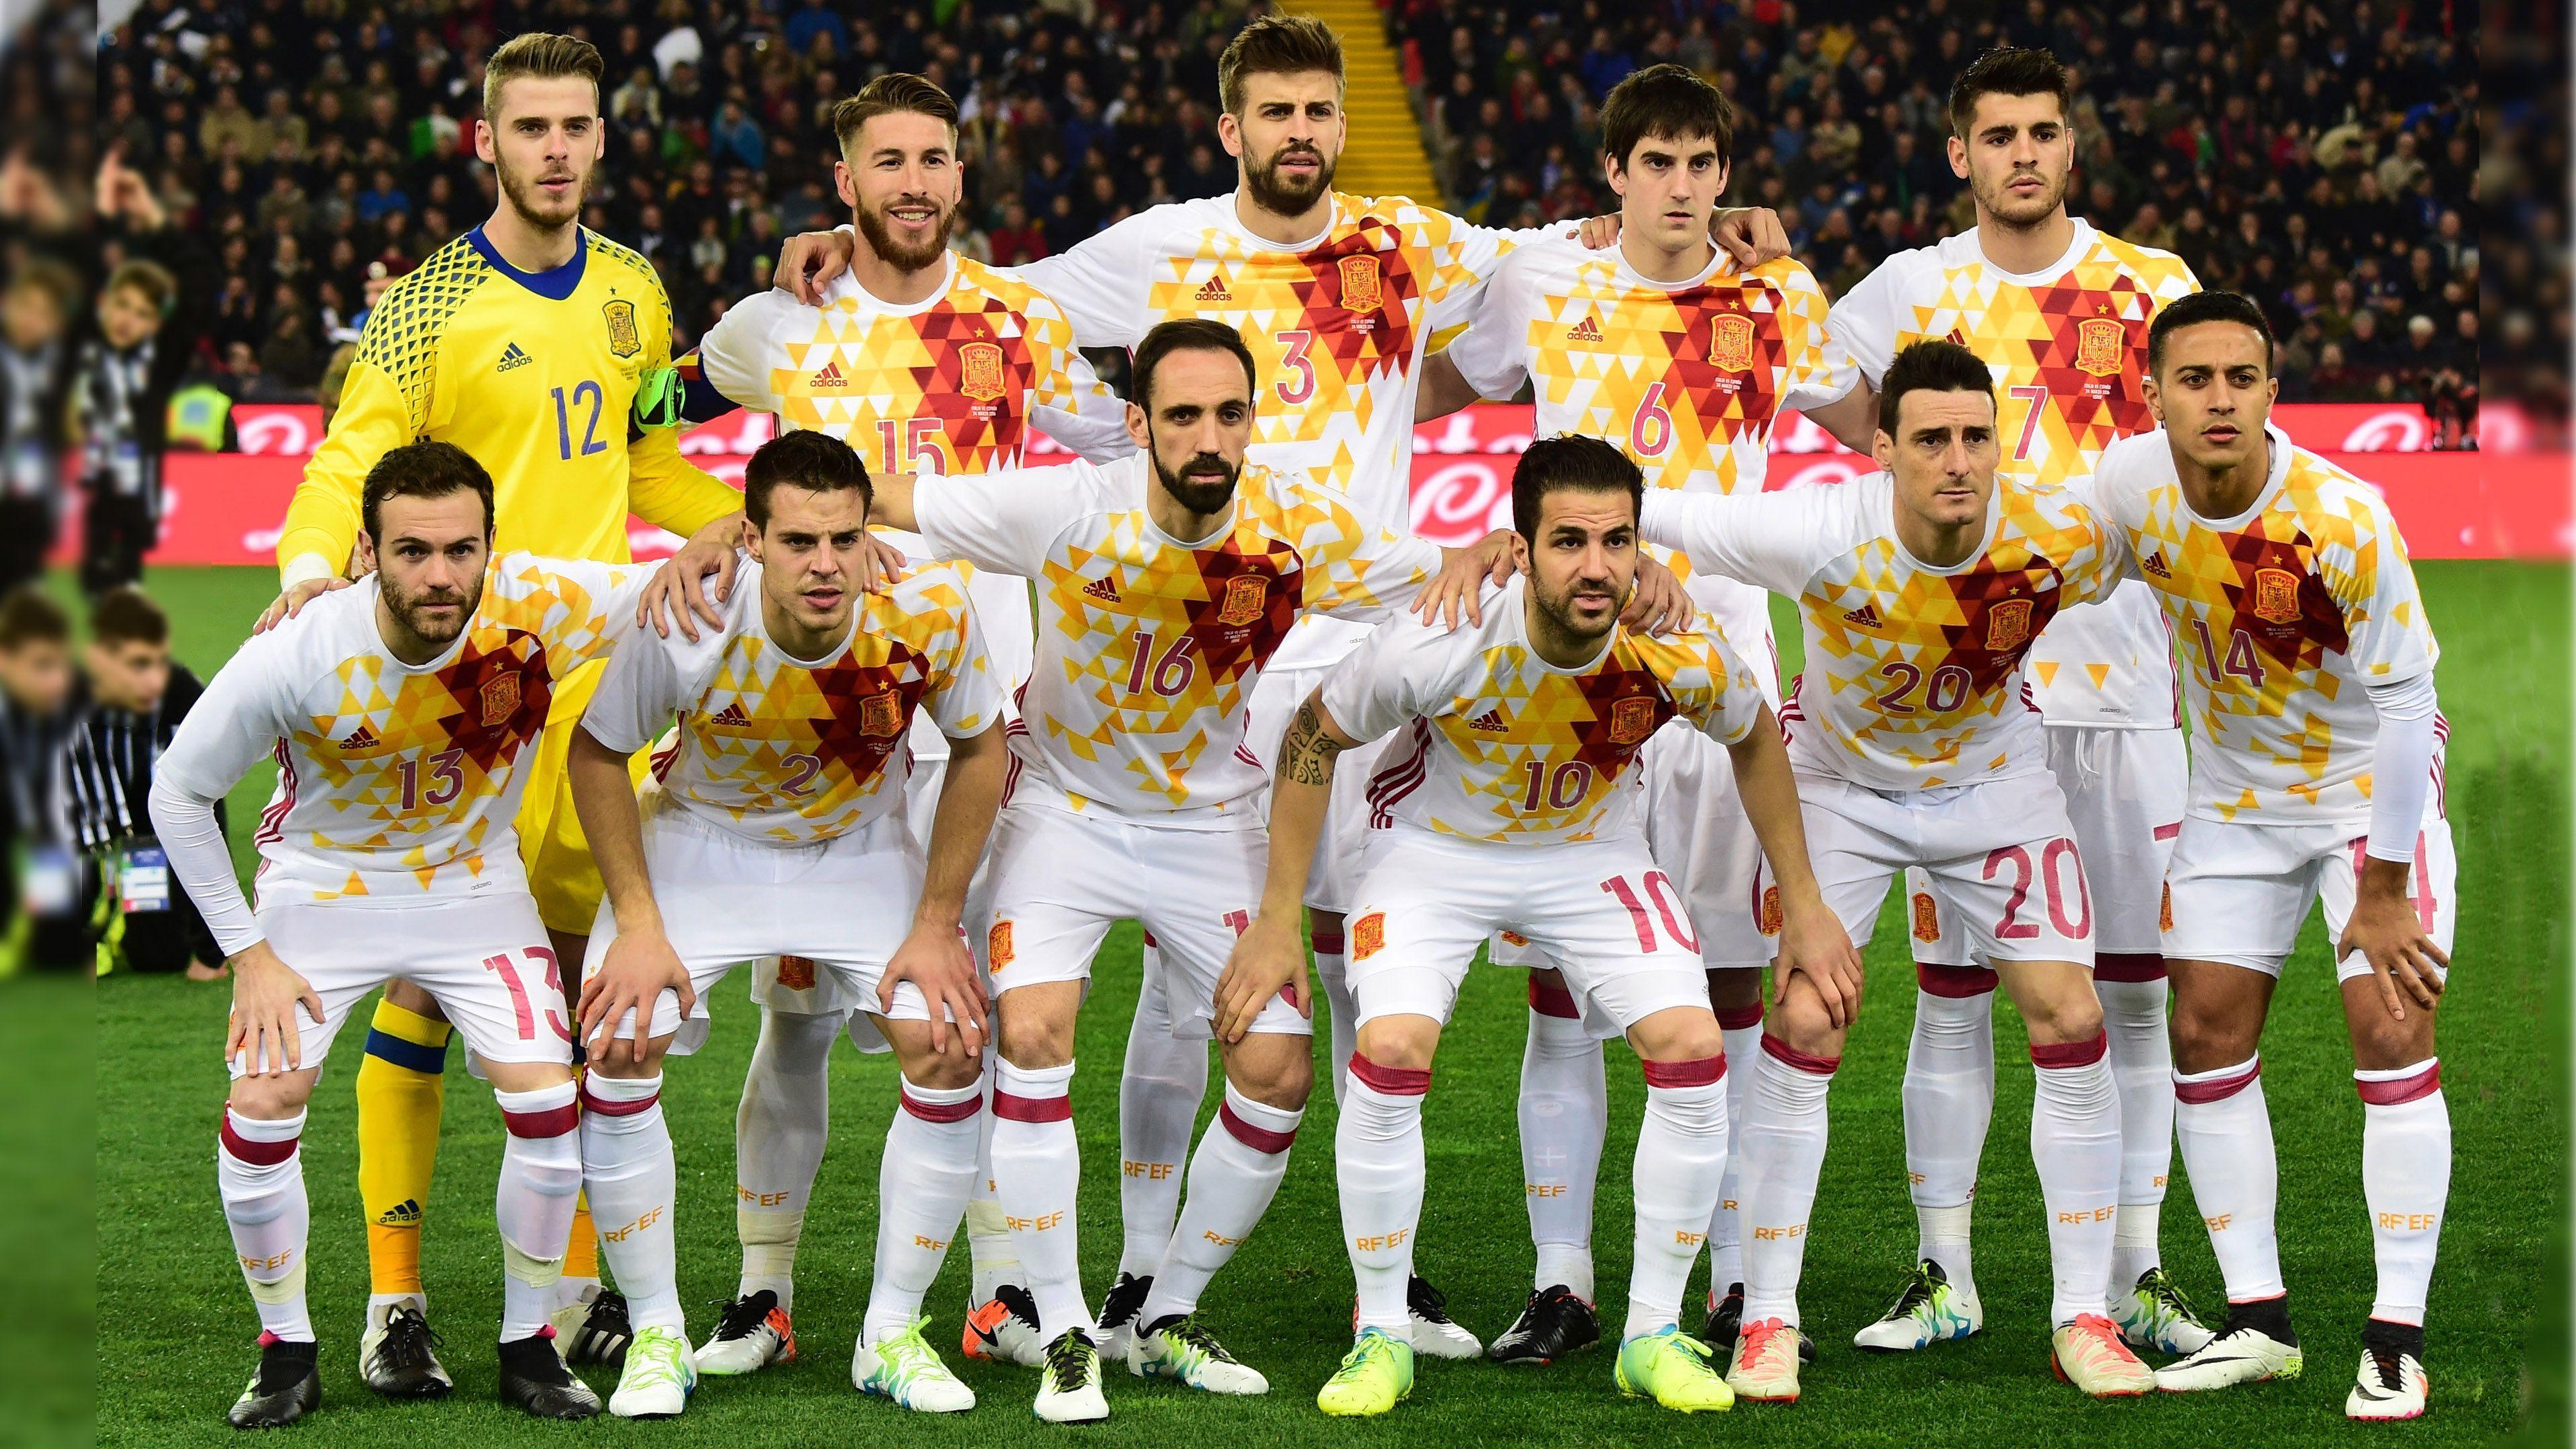  The image shows the Spanish national soccer team posing for a photo before a match.